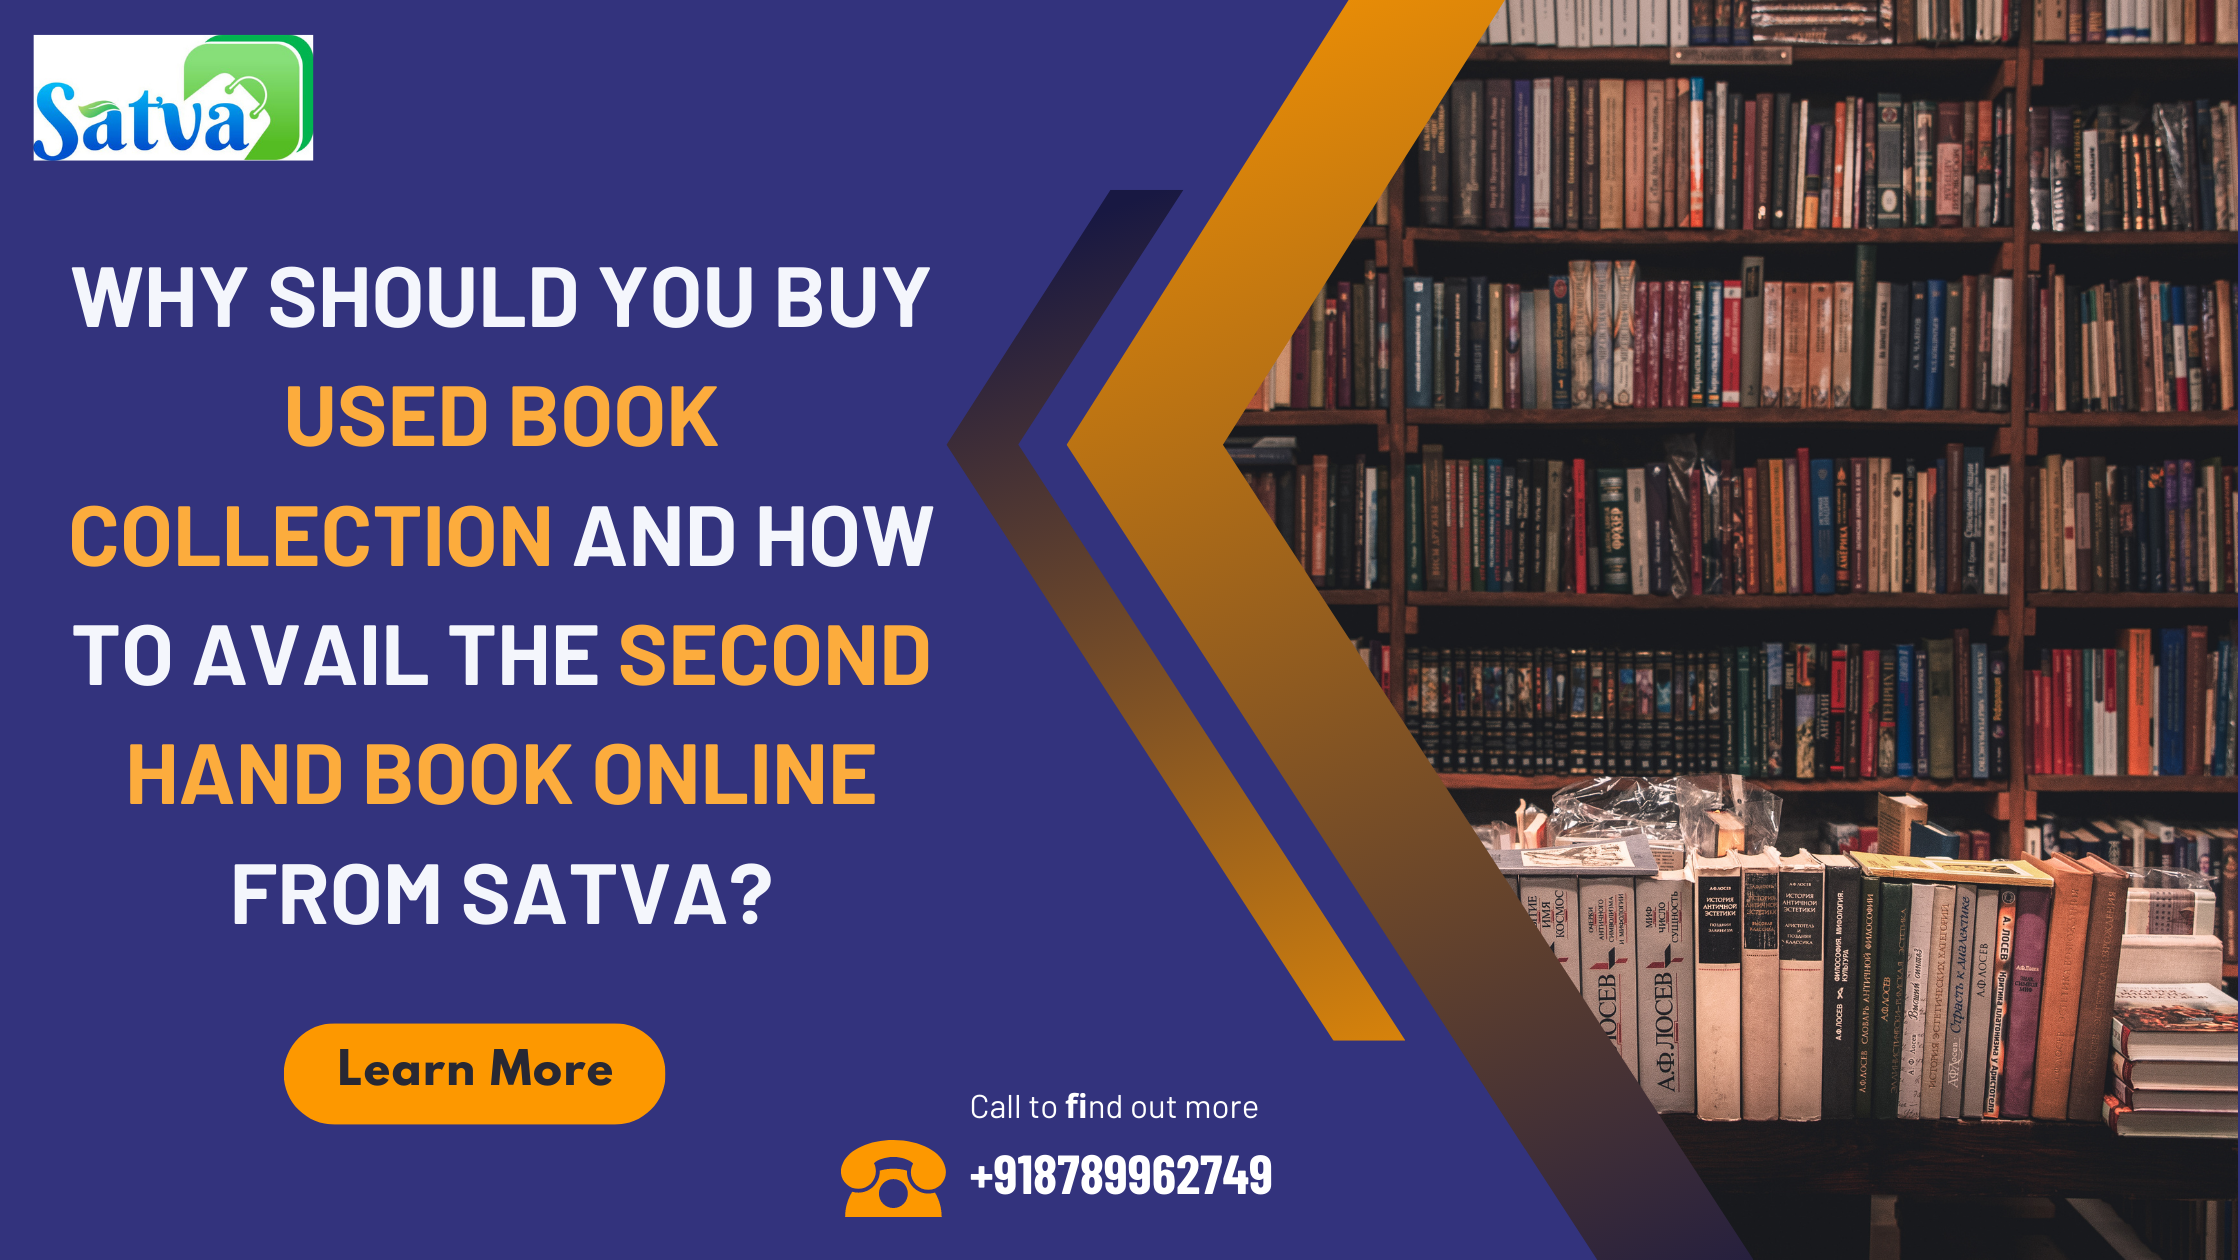 Why Should You Buy Used Book Collection and How to avail the Second Hand Book online from Satva?